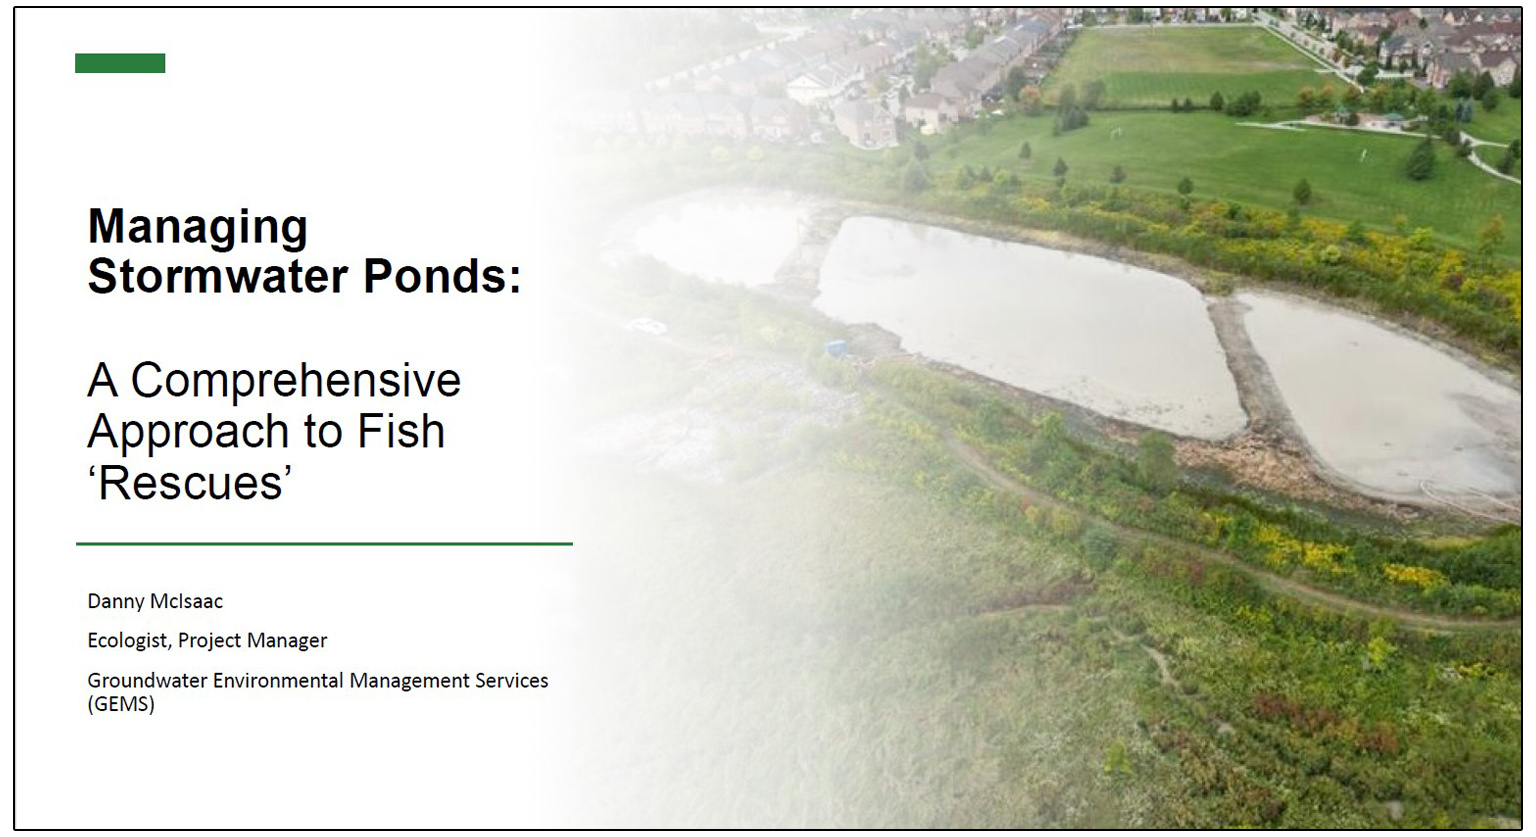 Managing Stormwater Ponds - A Comprehensive Approach to Fish Rescues - presented by Danny McIsaac